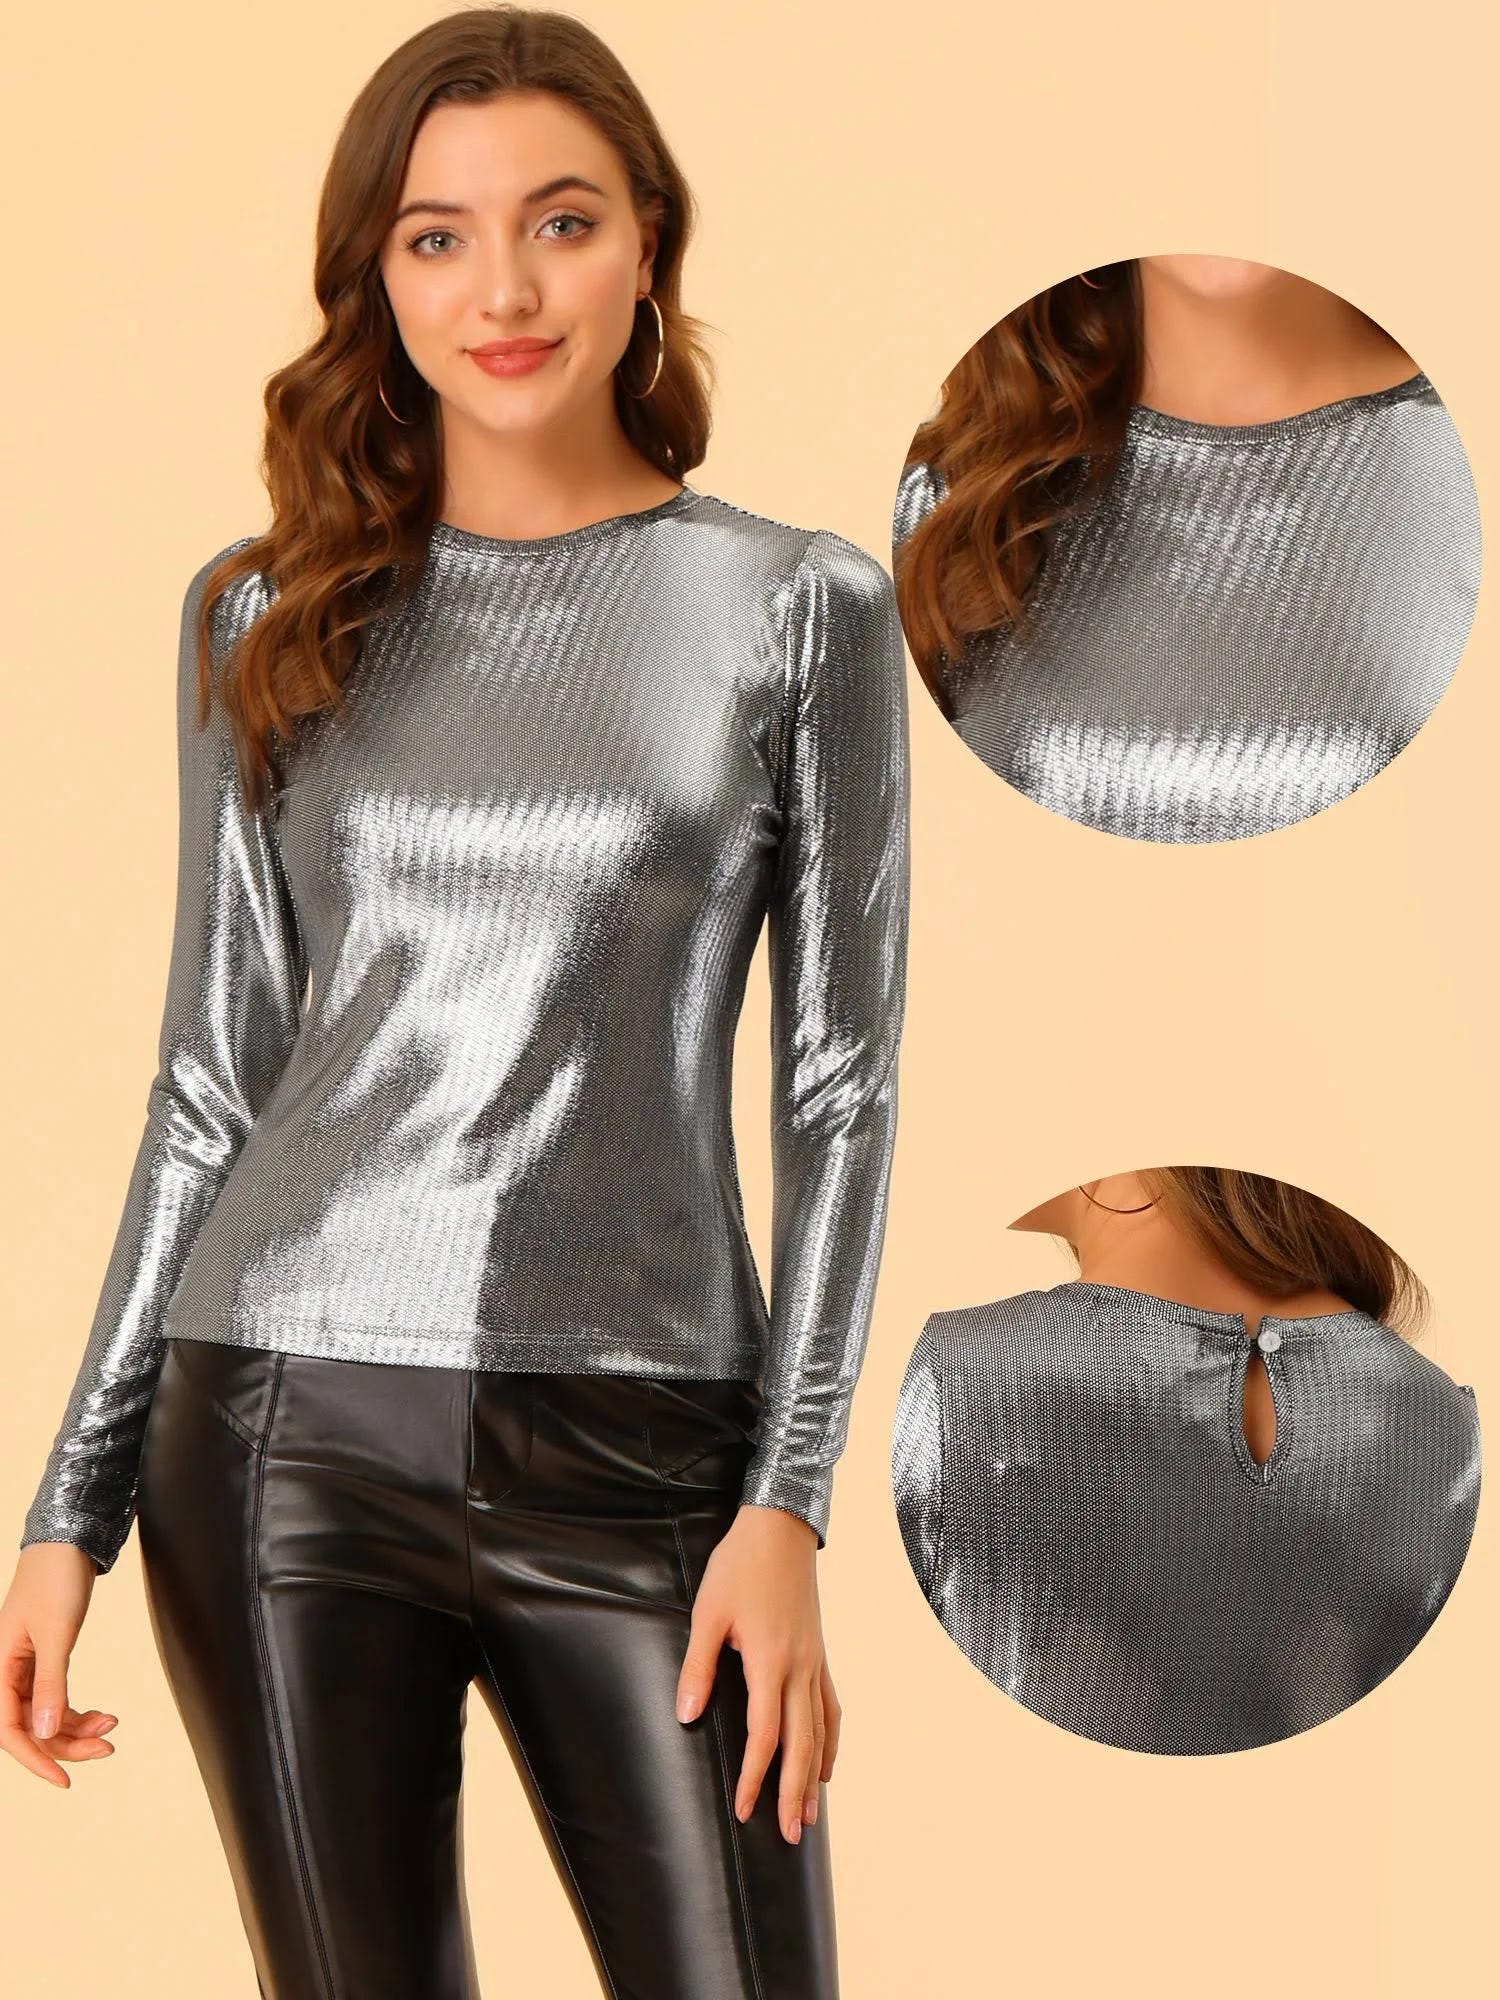 Sparkly Metallic Long Sleeve Party Top | Image